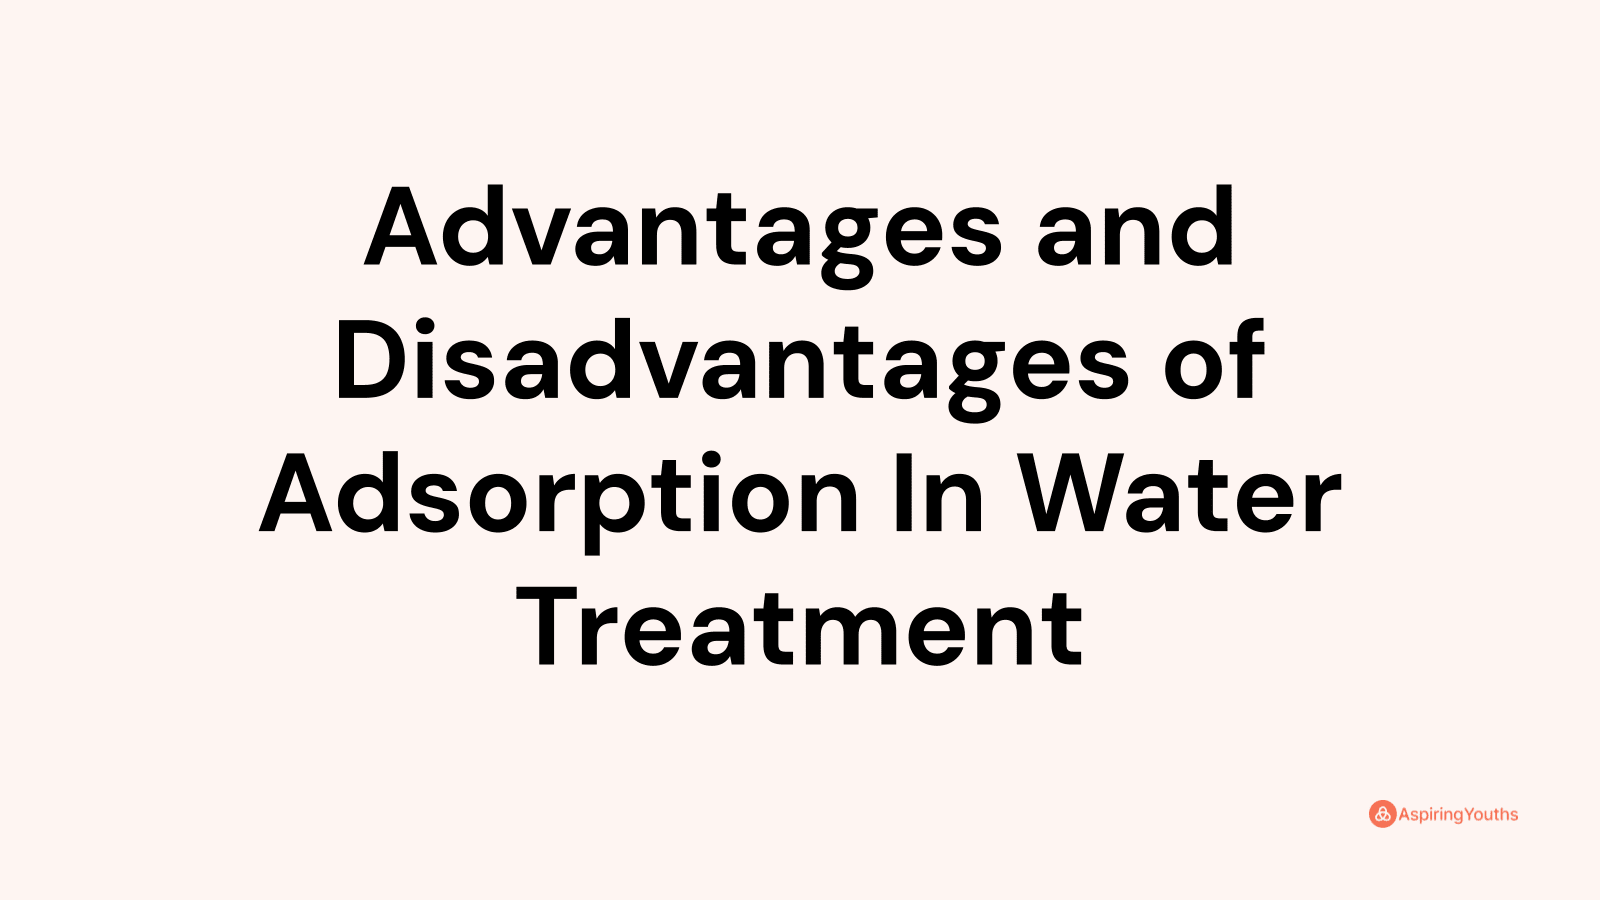 Advantages and disadvantages of Adsorption In Water Treatment